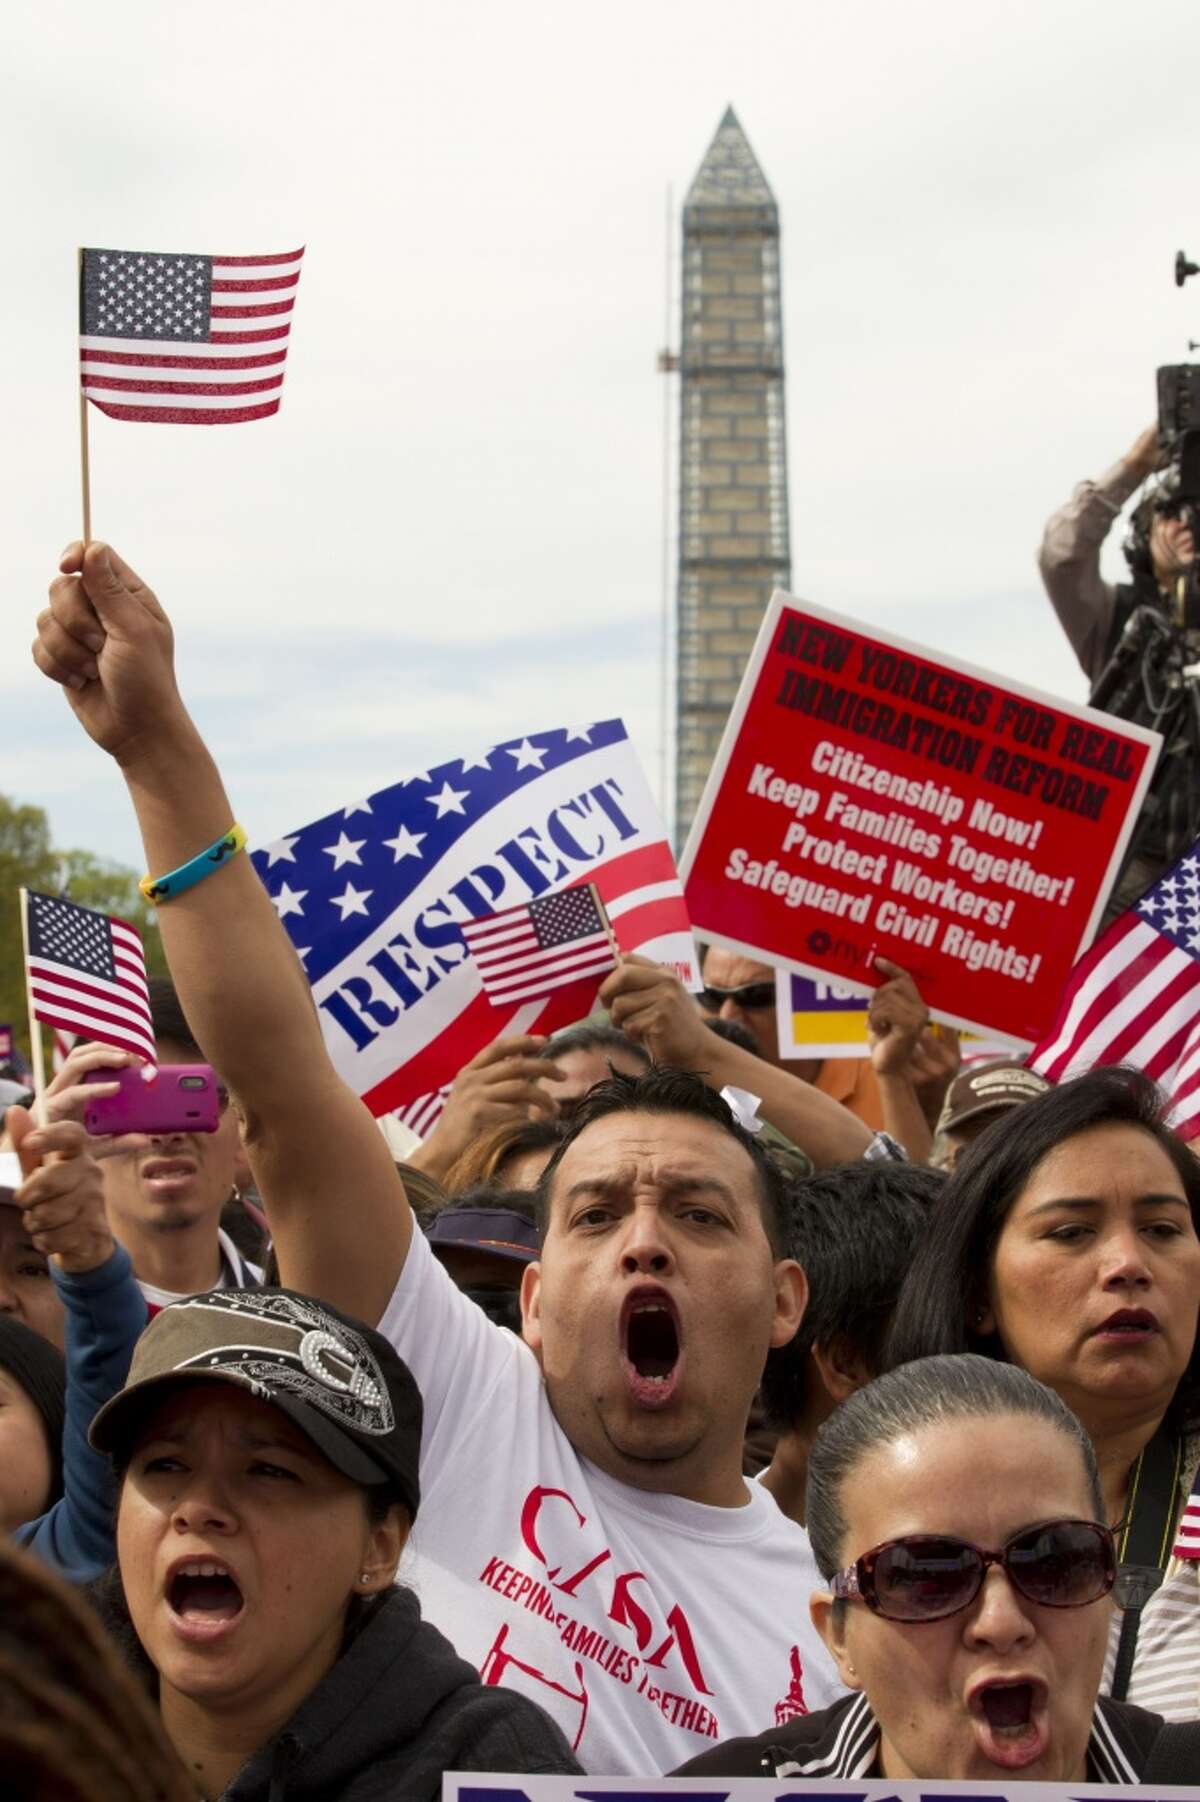 Demonstrators shout during a immigration a rally on the National Mall in Washington, Tuesday, Oct. 8, 2013, calling on the House Republican leadership to pass comprehensive immigration reform with a path to citizenship. The Washington Monument is in the background. ( AP Photo/Jose Luis Magana)